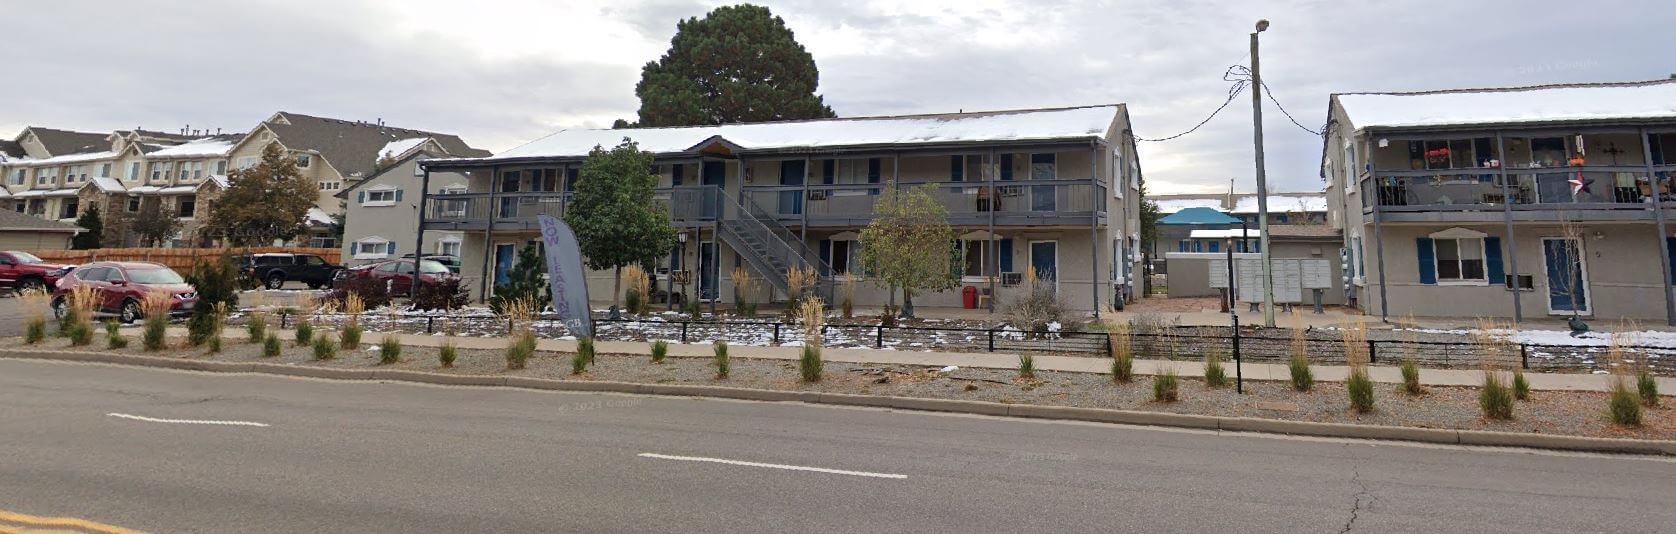 Google Maps Street View image of Cherry Creek Square Apartments, showing the front facade and surrounding street area.